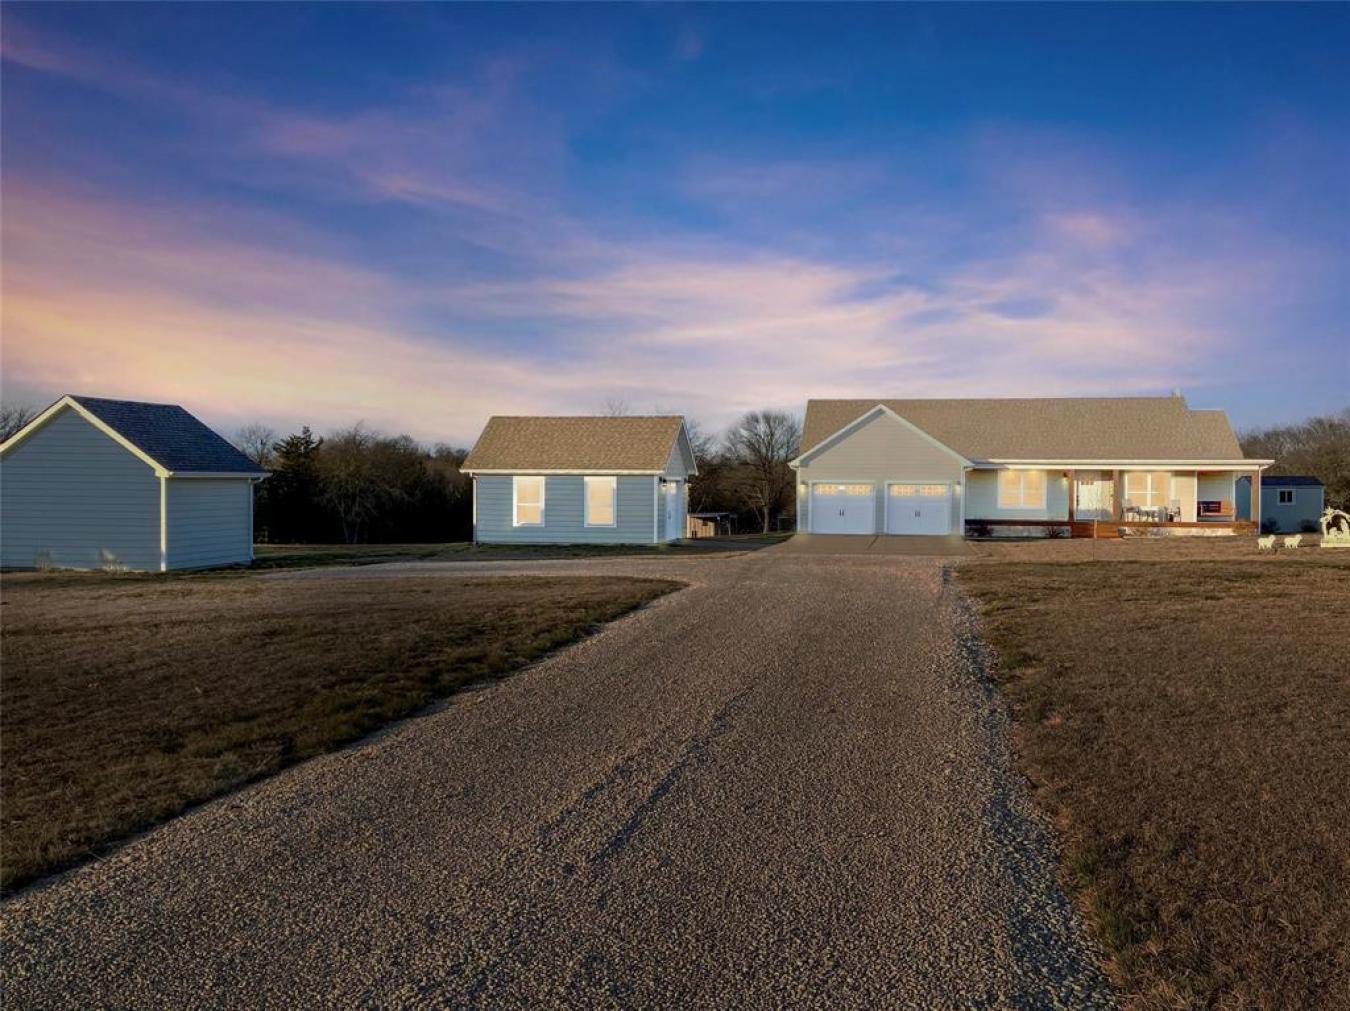 414 White Oak, Anna, Texas, 75409, United States, 3 Bedrooms Bedrooms, ,3 BathroomsBathrooms,Residential,For Sale,414 White Oak,1497246